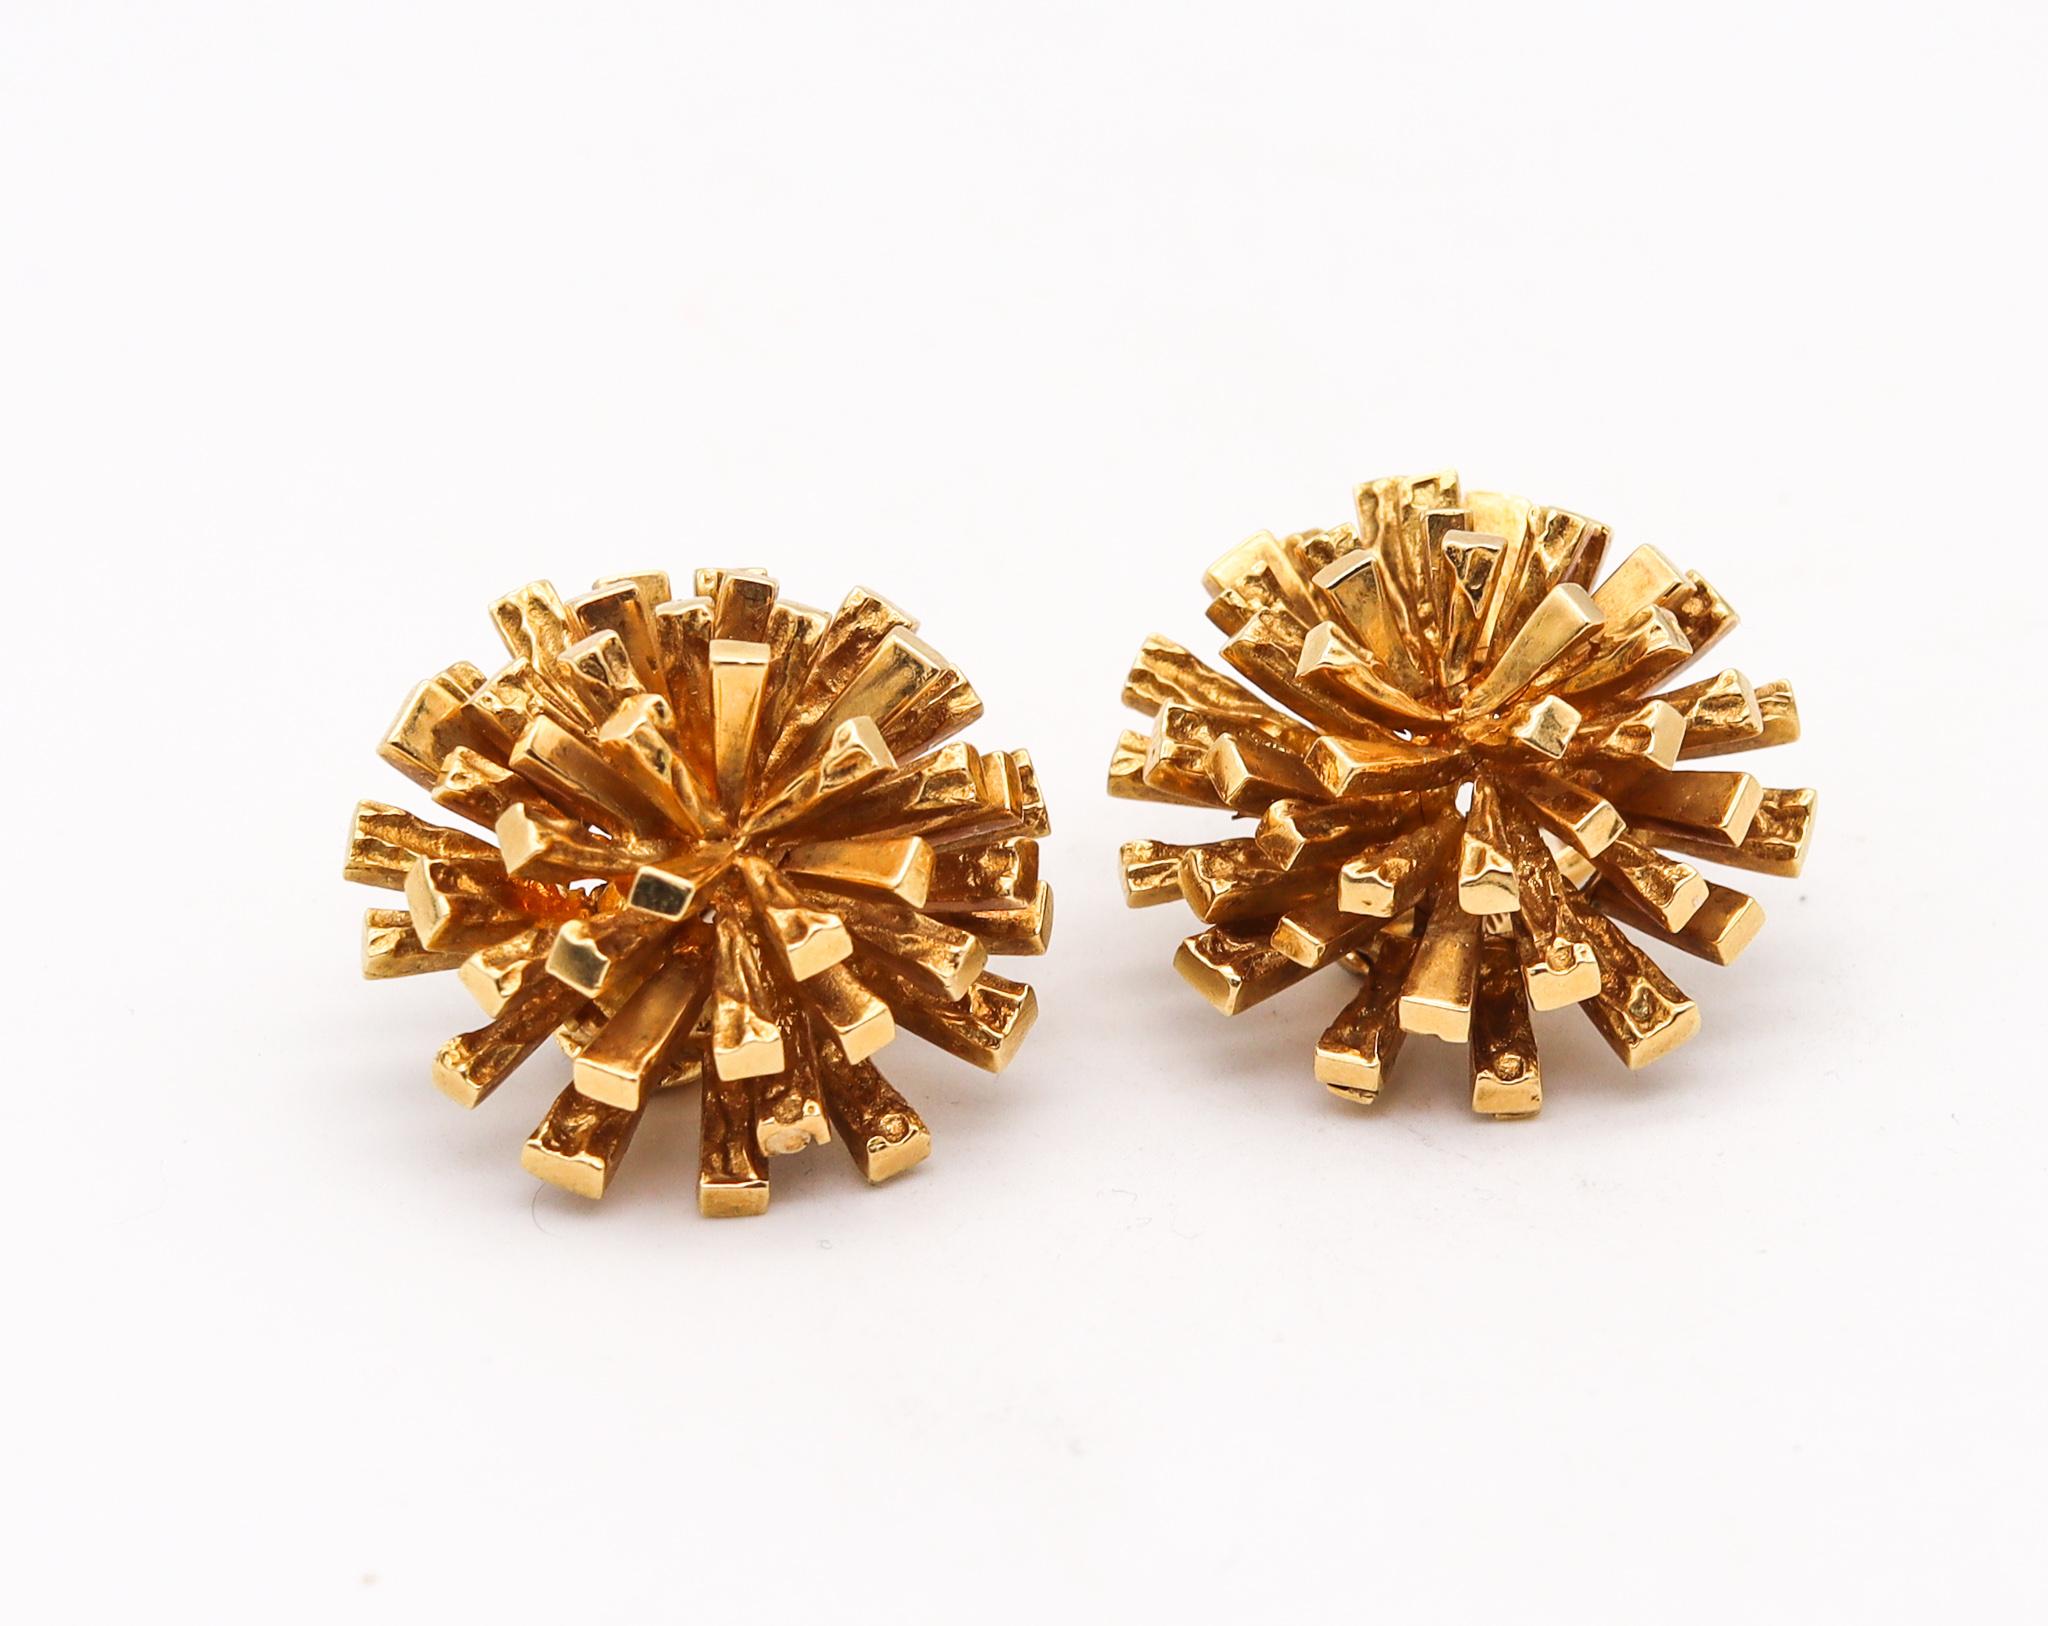 Sunburst sputnik earrings designed by Tiffany & Co.

Gorgeous vintage pieces created in New York city at the Tiffany Studios, back in the 1971. These spiky clip earrings has been crafted in the shape of a sunburst explosion in solid yellow gold of